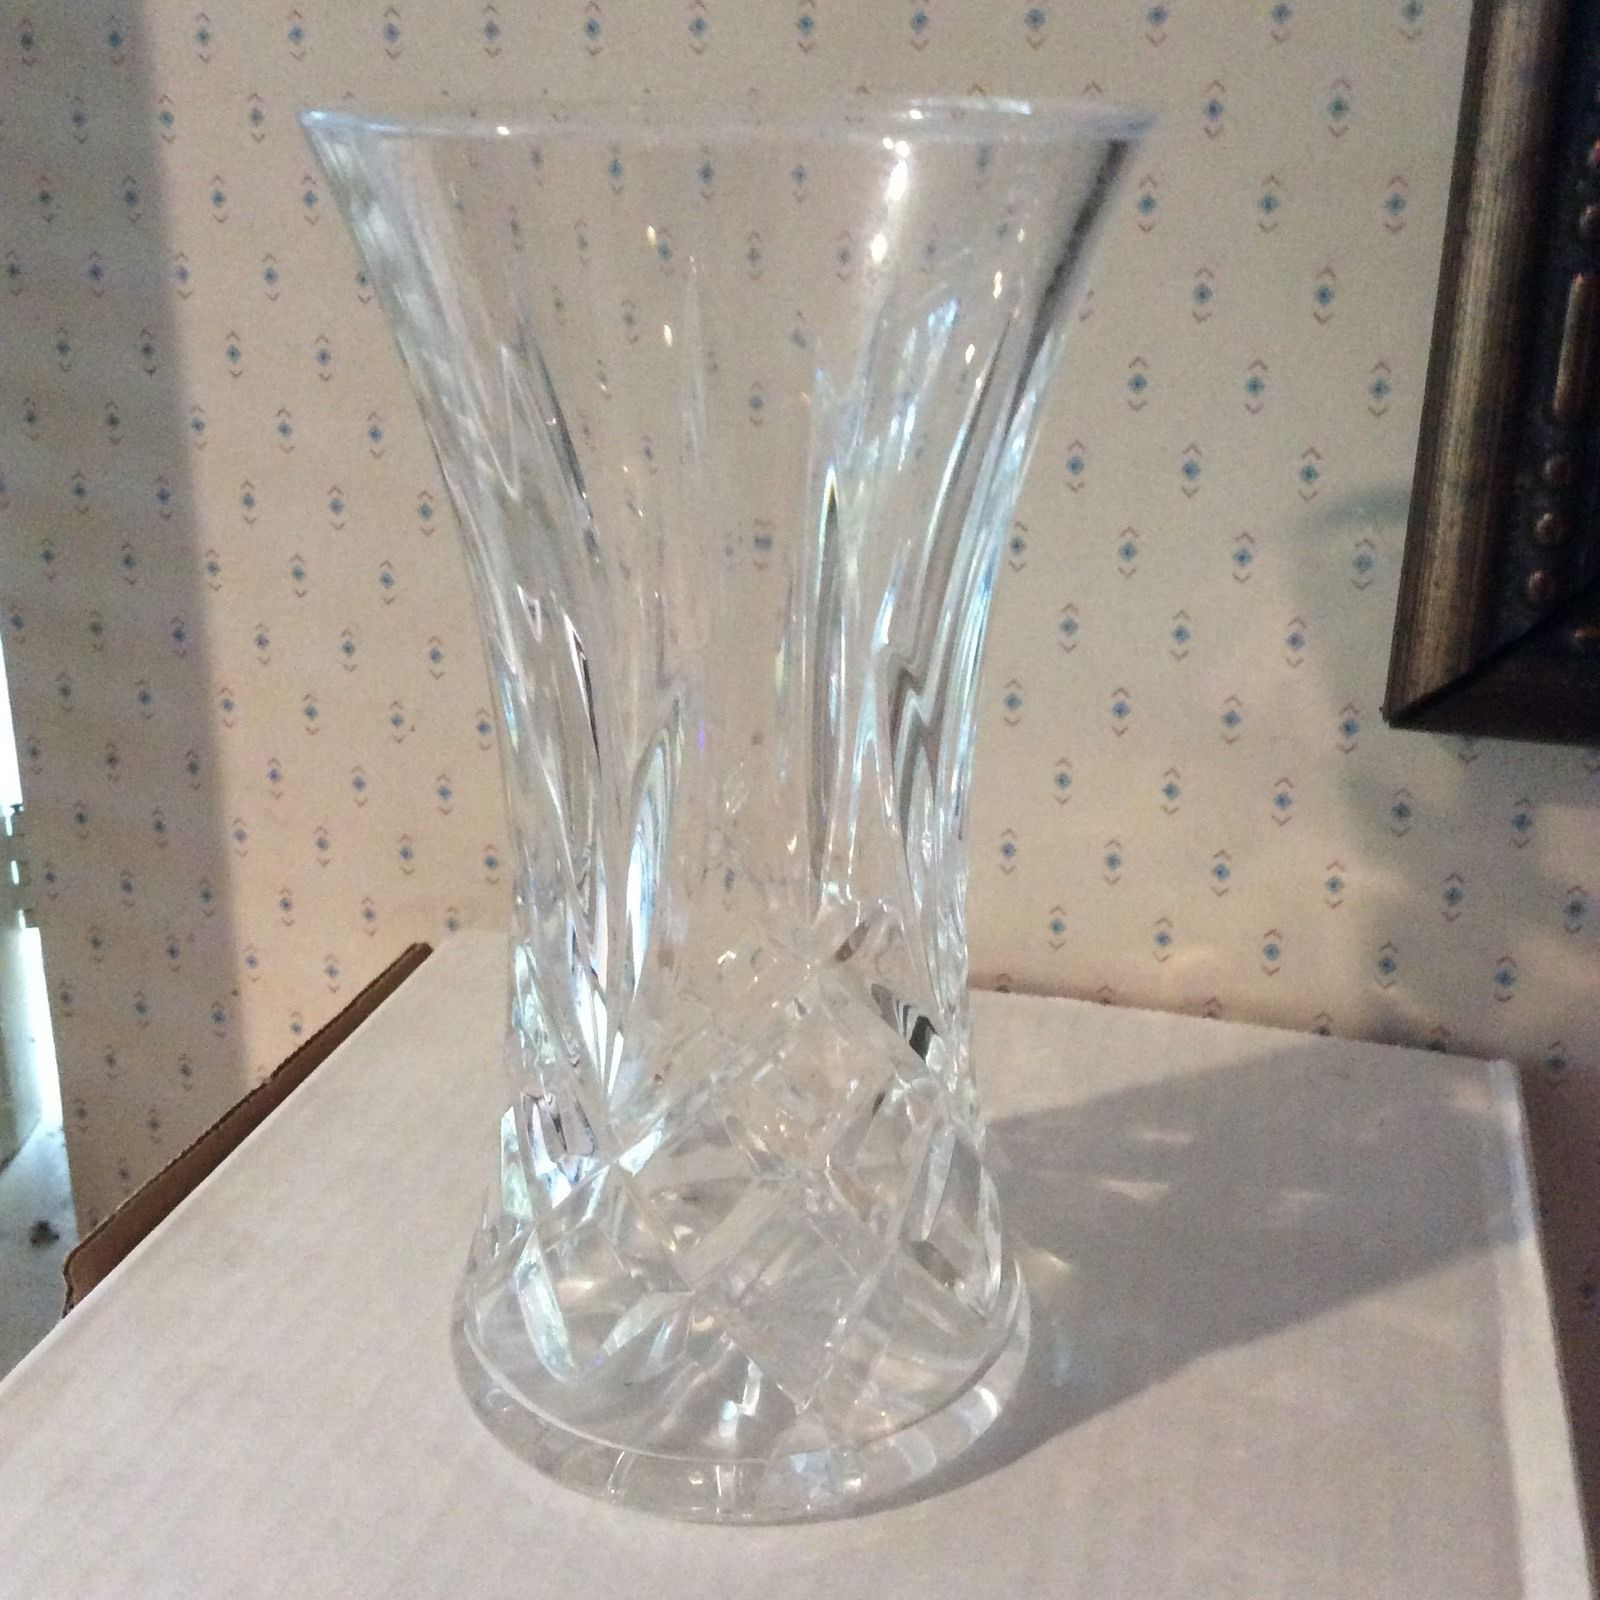 25 Awesome Waterford Marquis Sweet Memories Vase 2024 free download waterford marquis sweet memories vase of vintage waterford crystal araglin vase 7 tall 49 99 picclick throughout vintage waterford crystal araglin vase 7 tall 1 of 7only 1 available